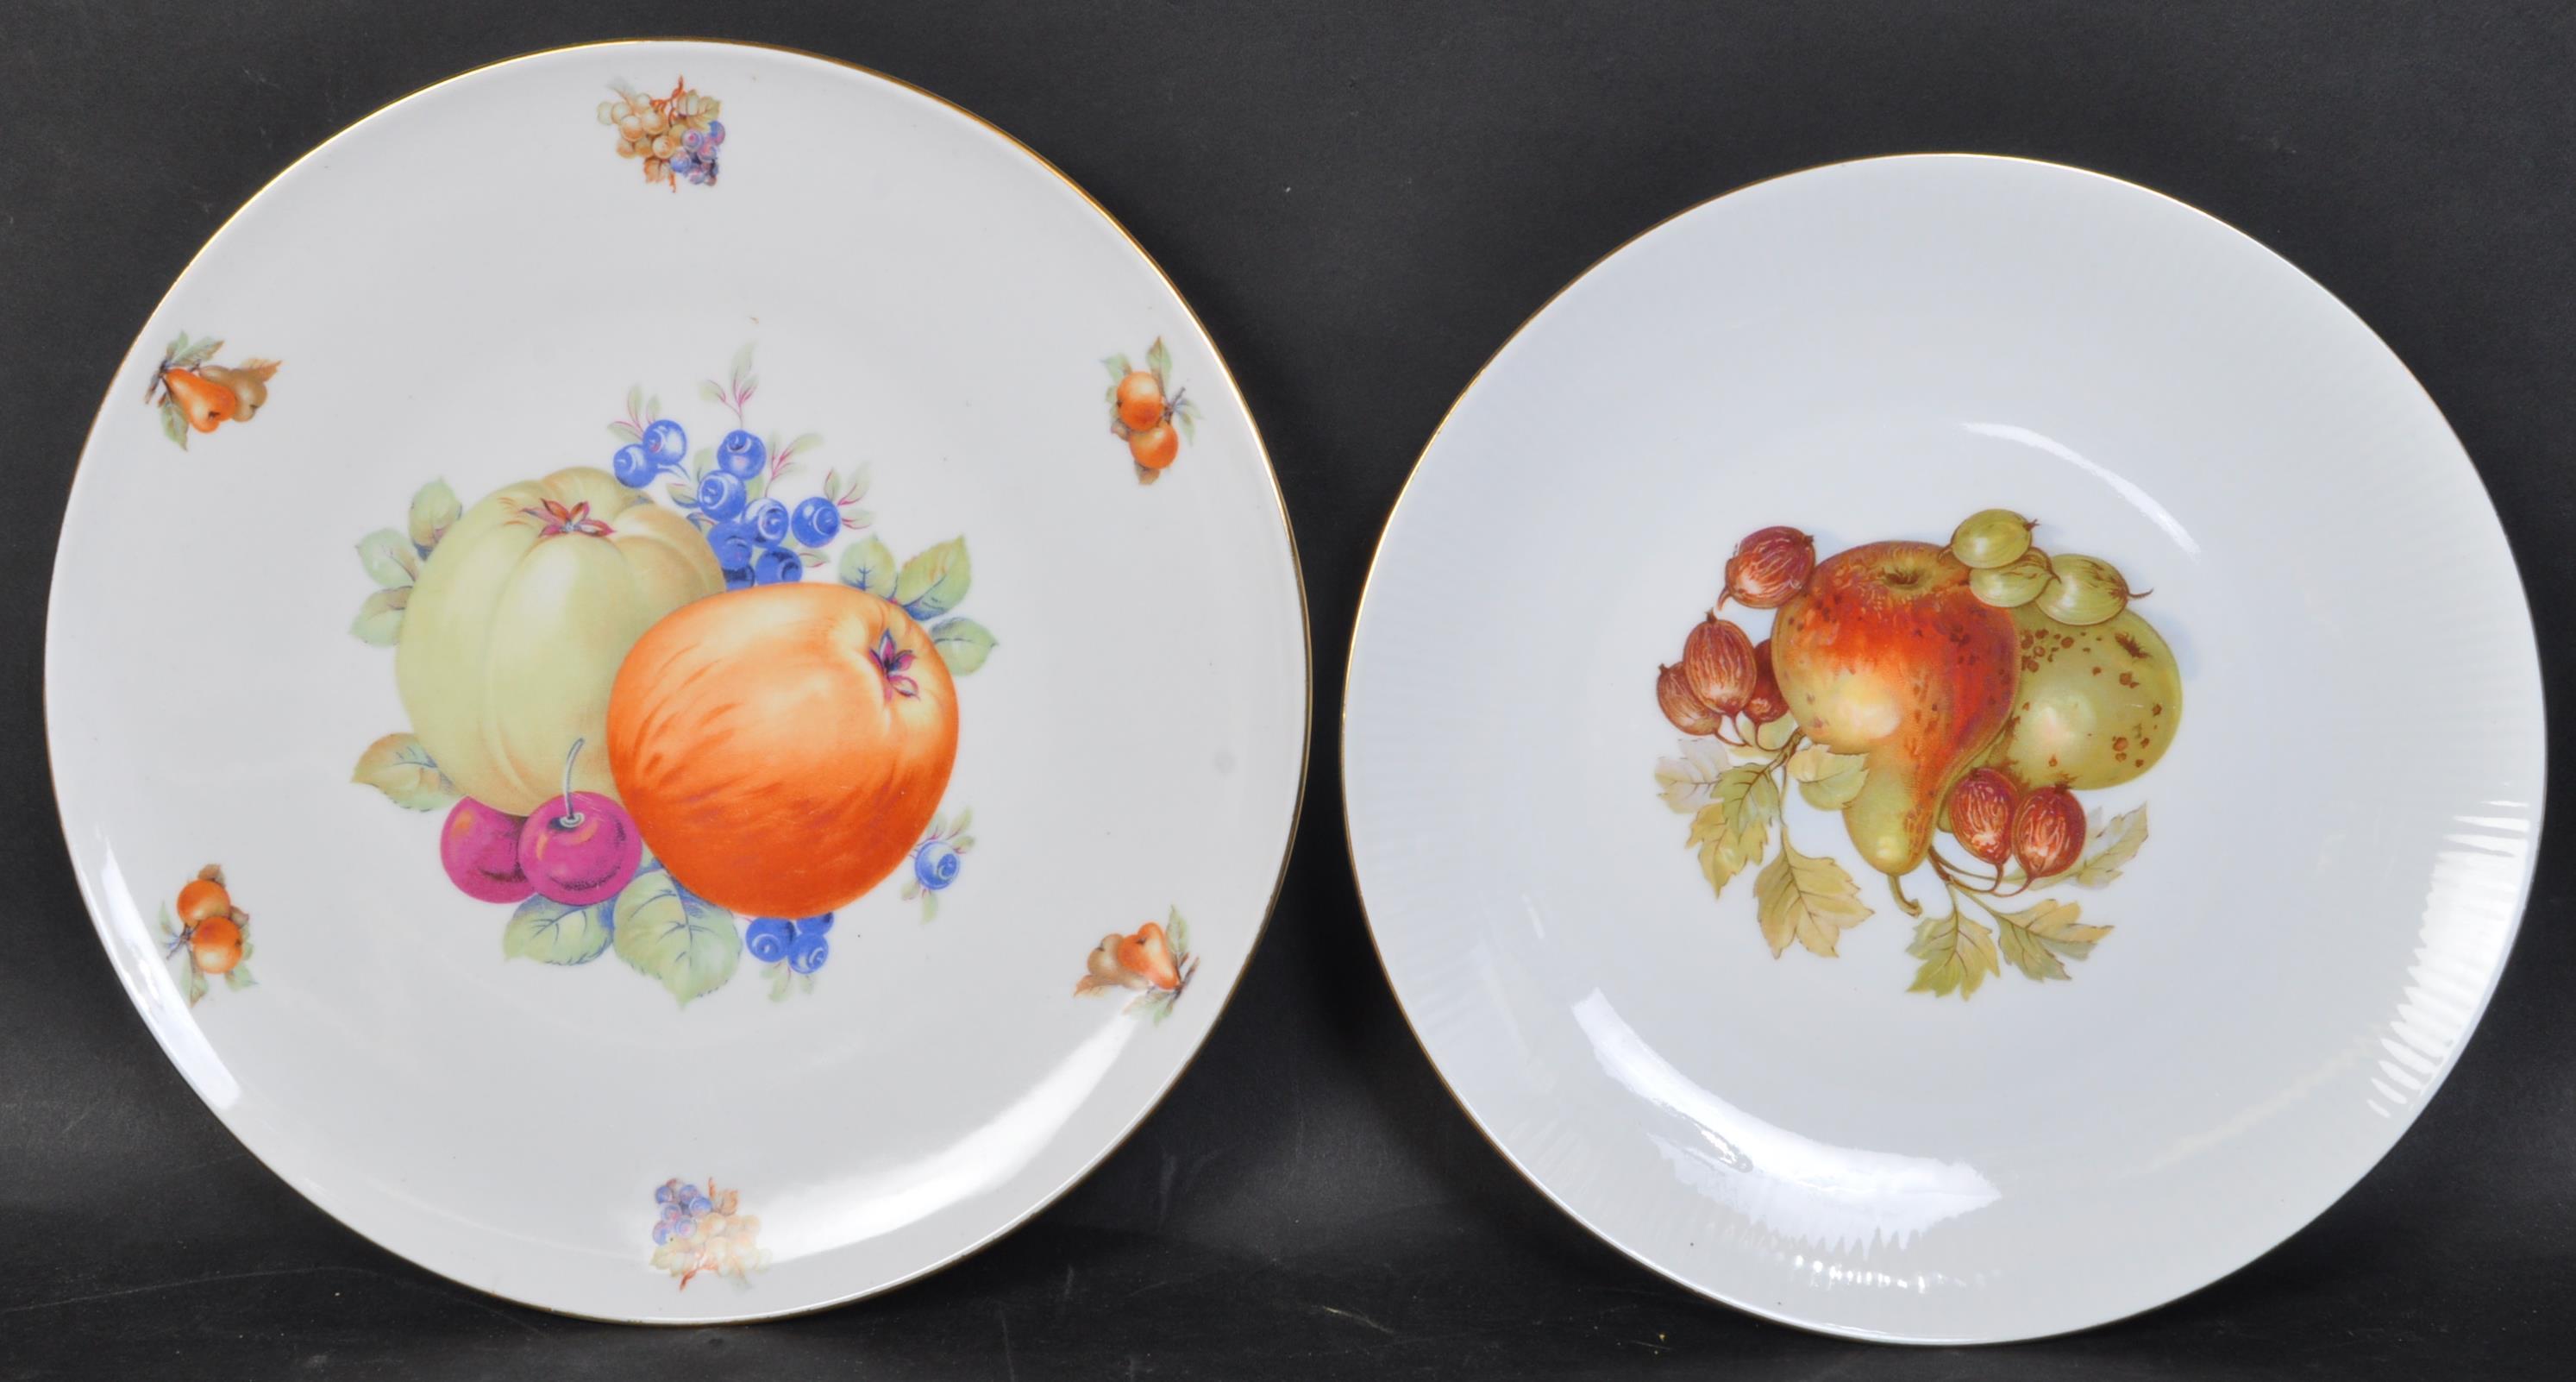 COLLECTION OF VINTAGE BAVARIAN SCHUMANN CHINA PLATES - Image 2 of 5